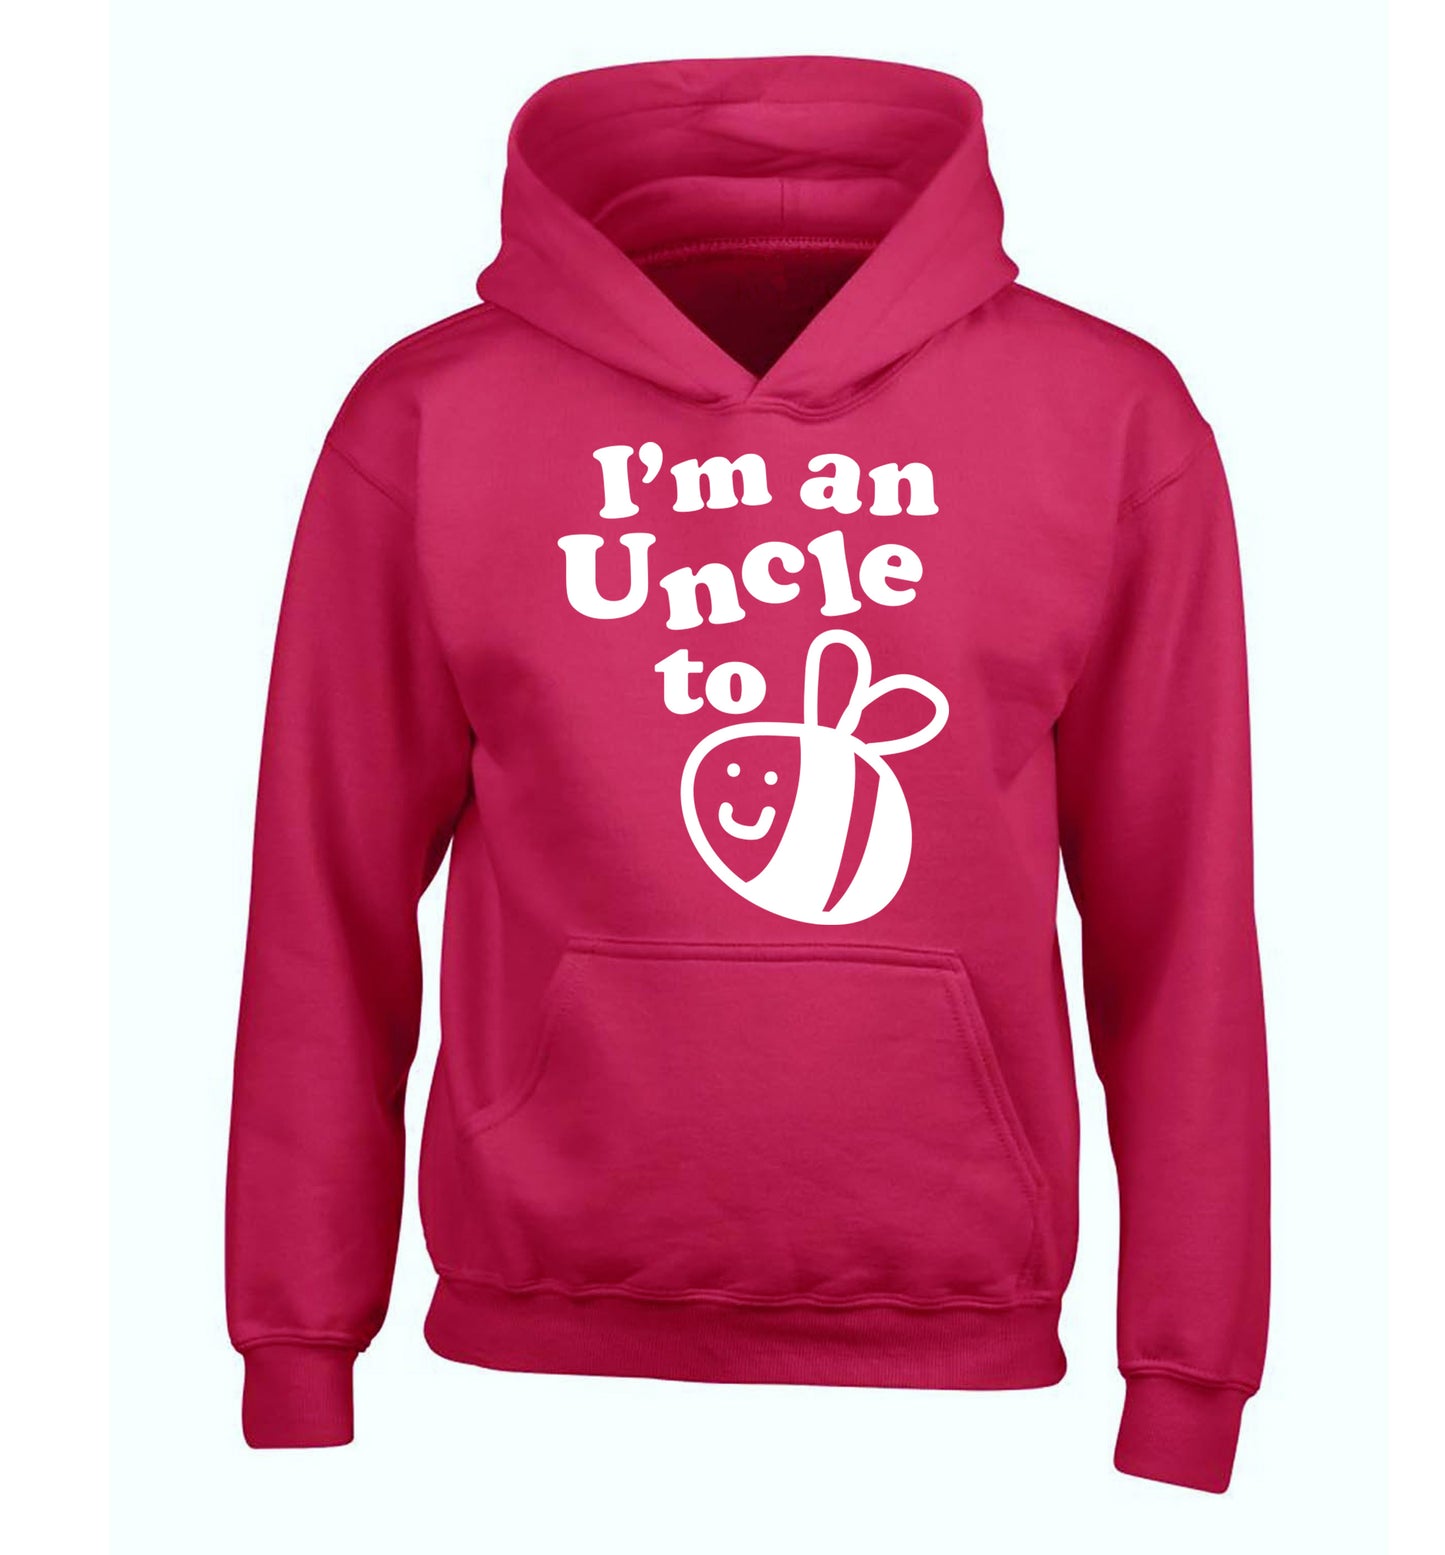 I'm an uncle to be children's pink hoodie 12-14 Years